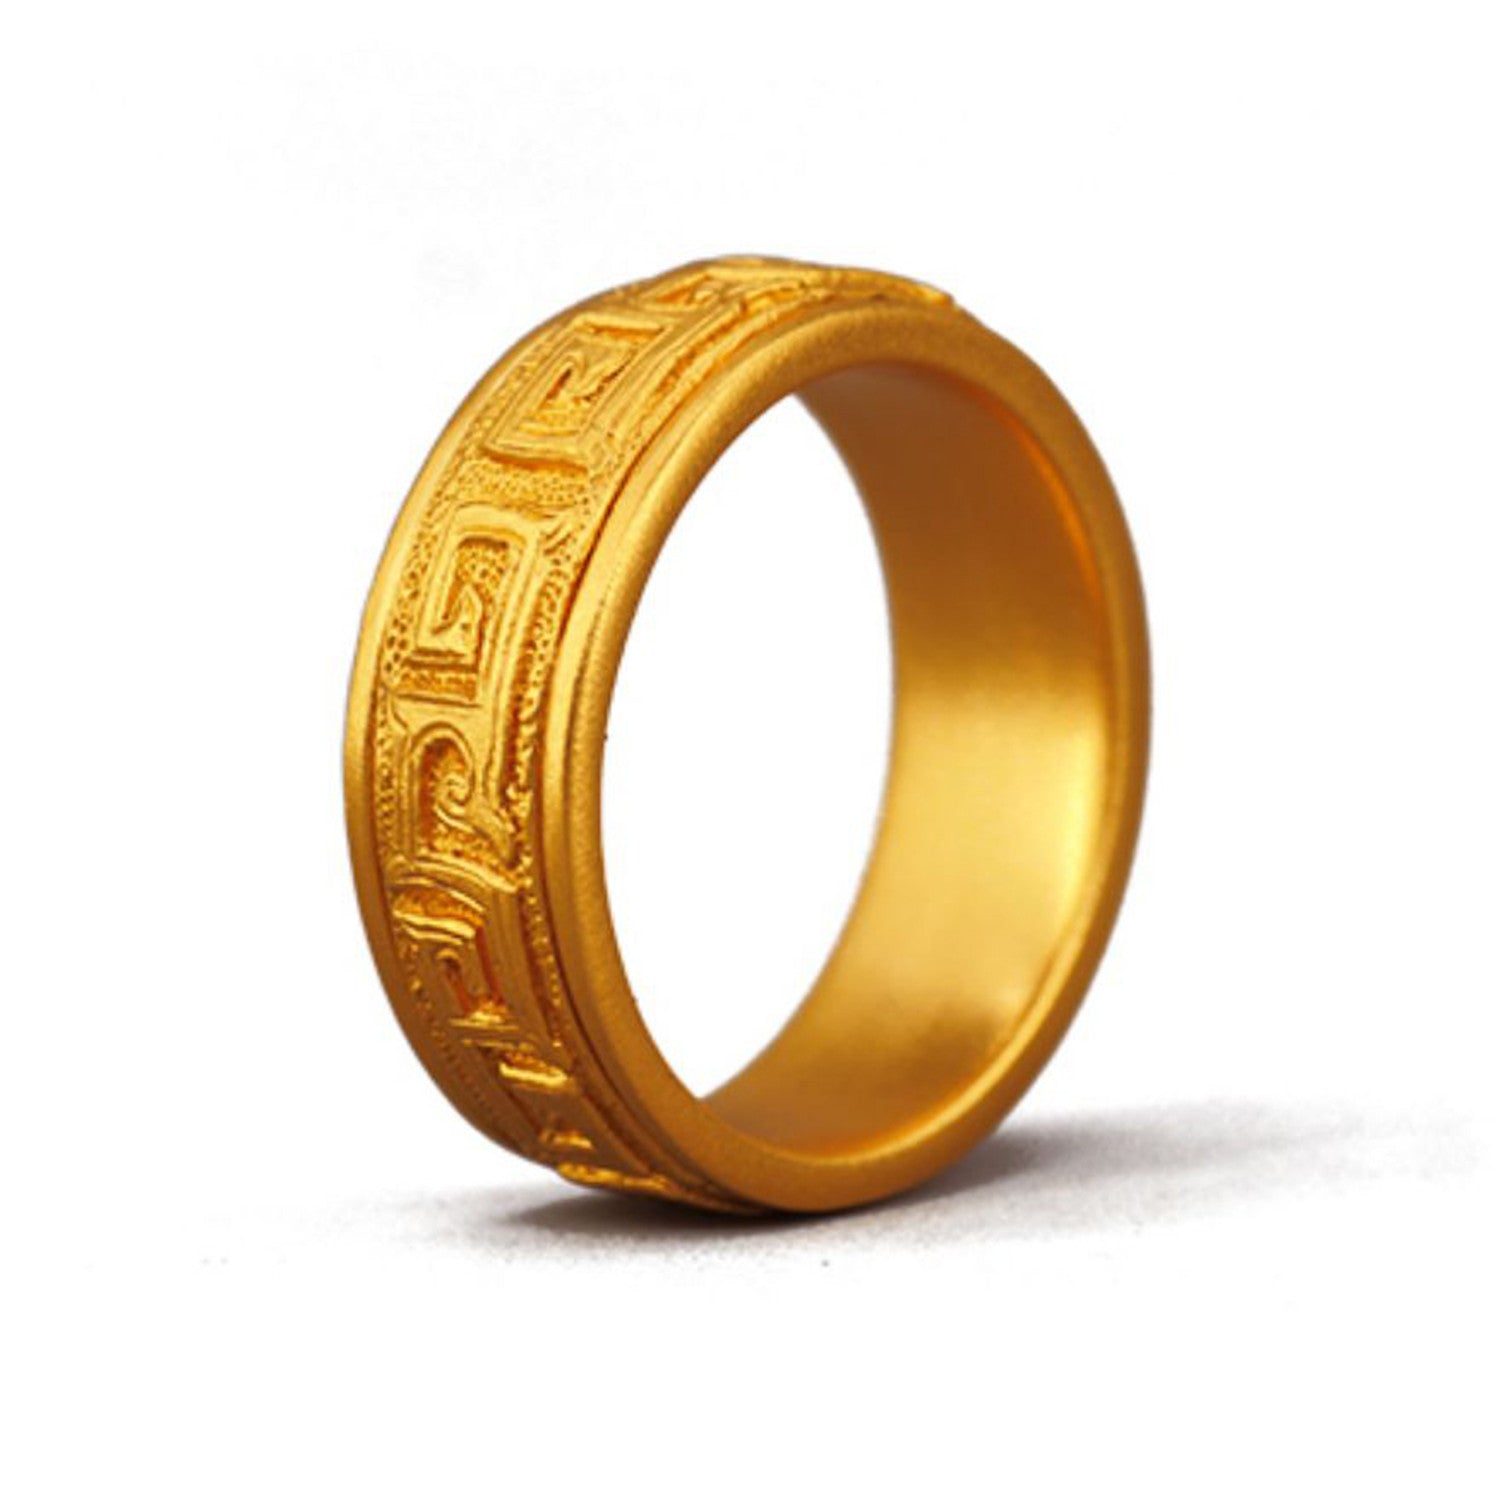 EVECOCO Full Gold Ring Hand Forging With Sculpted Reliefs,8mm Wide